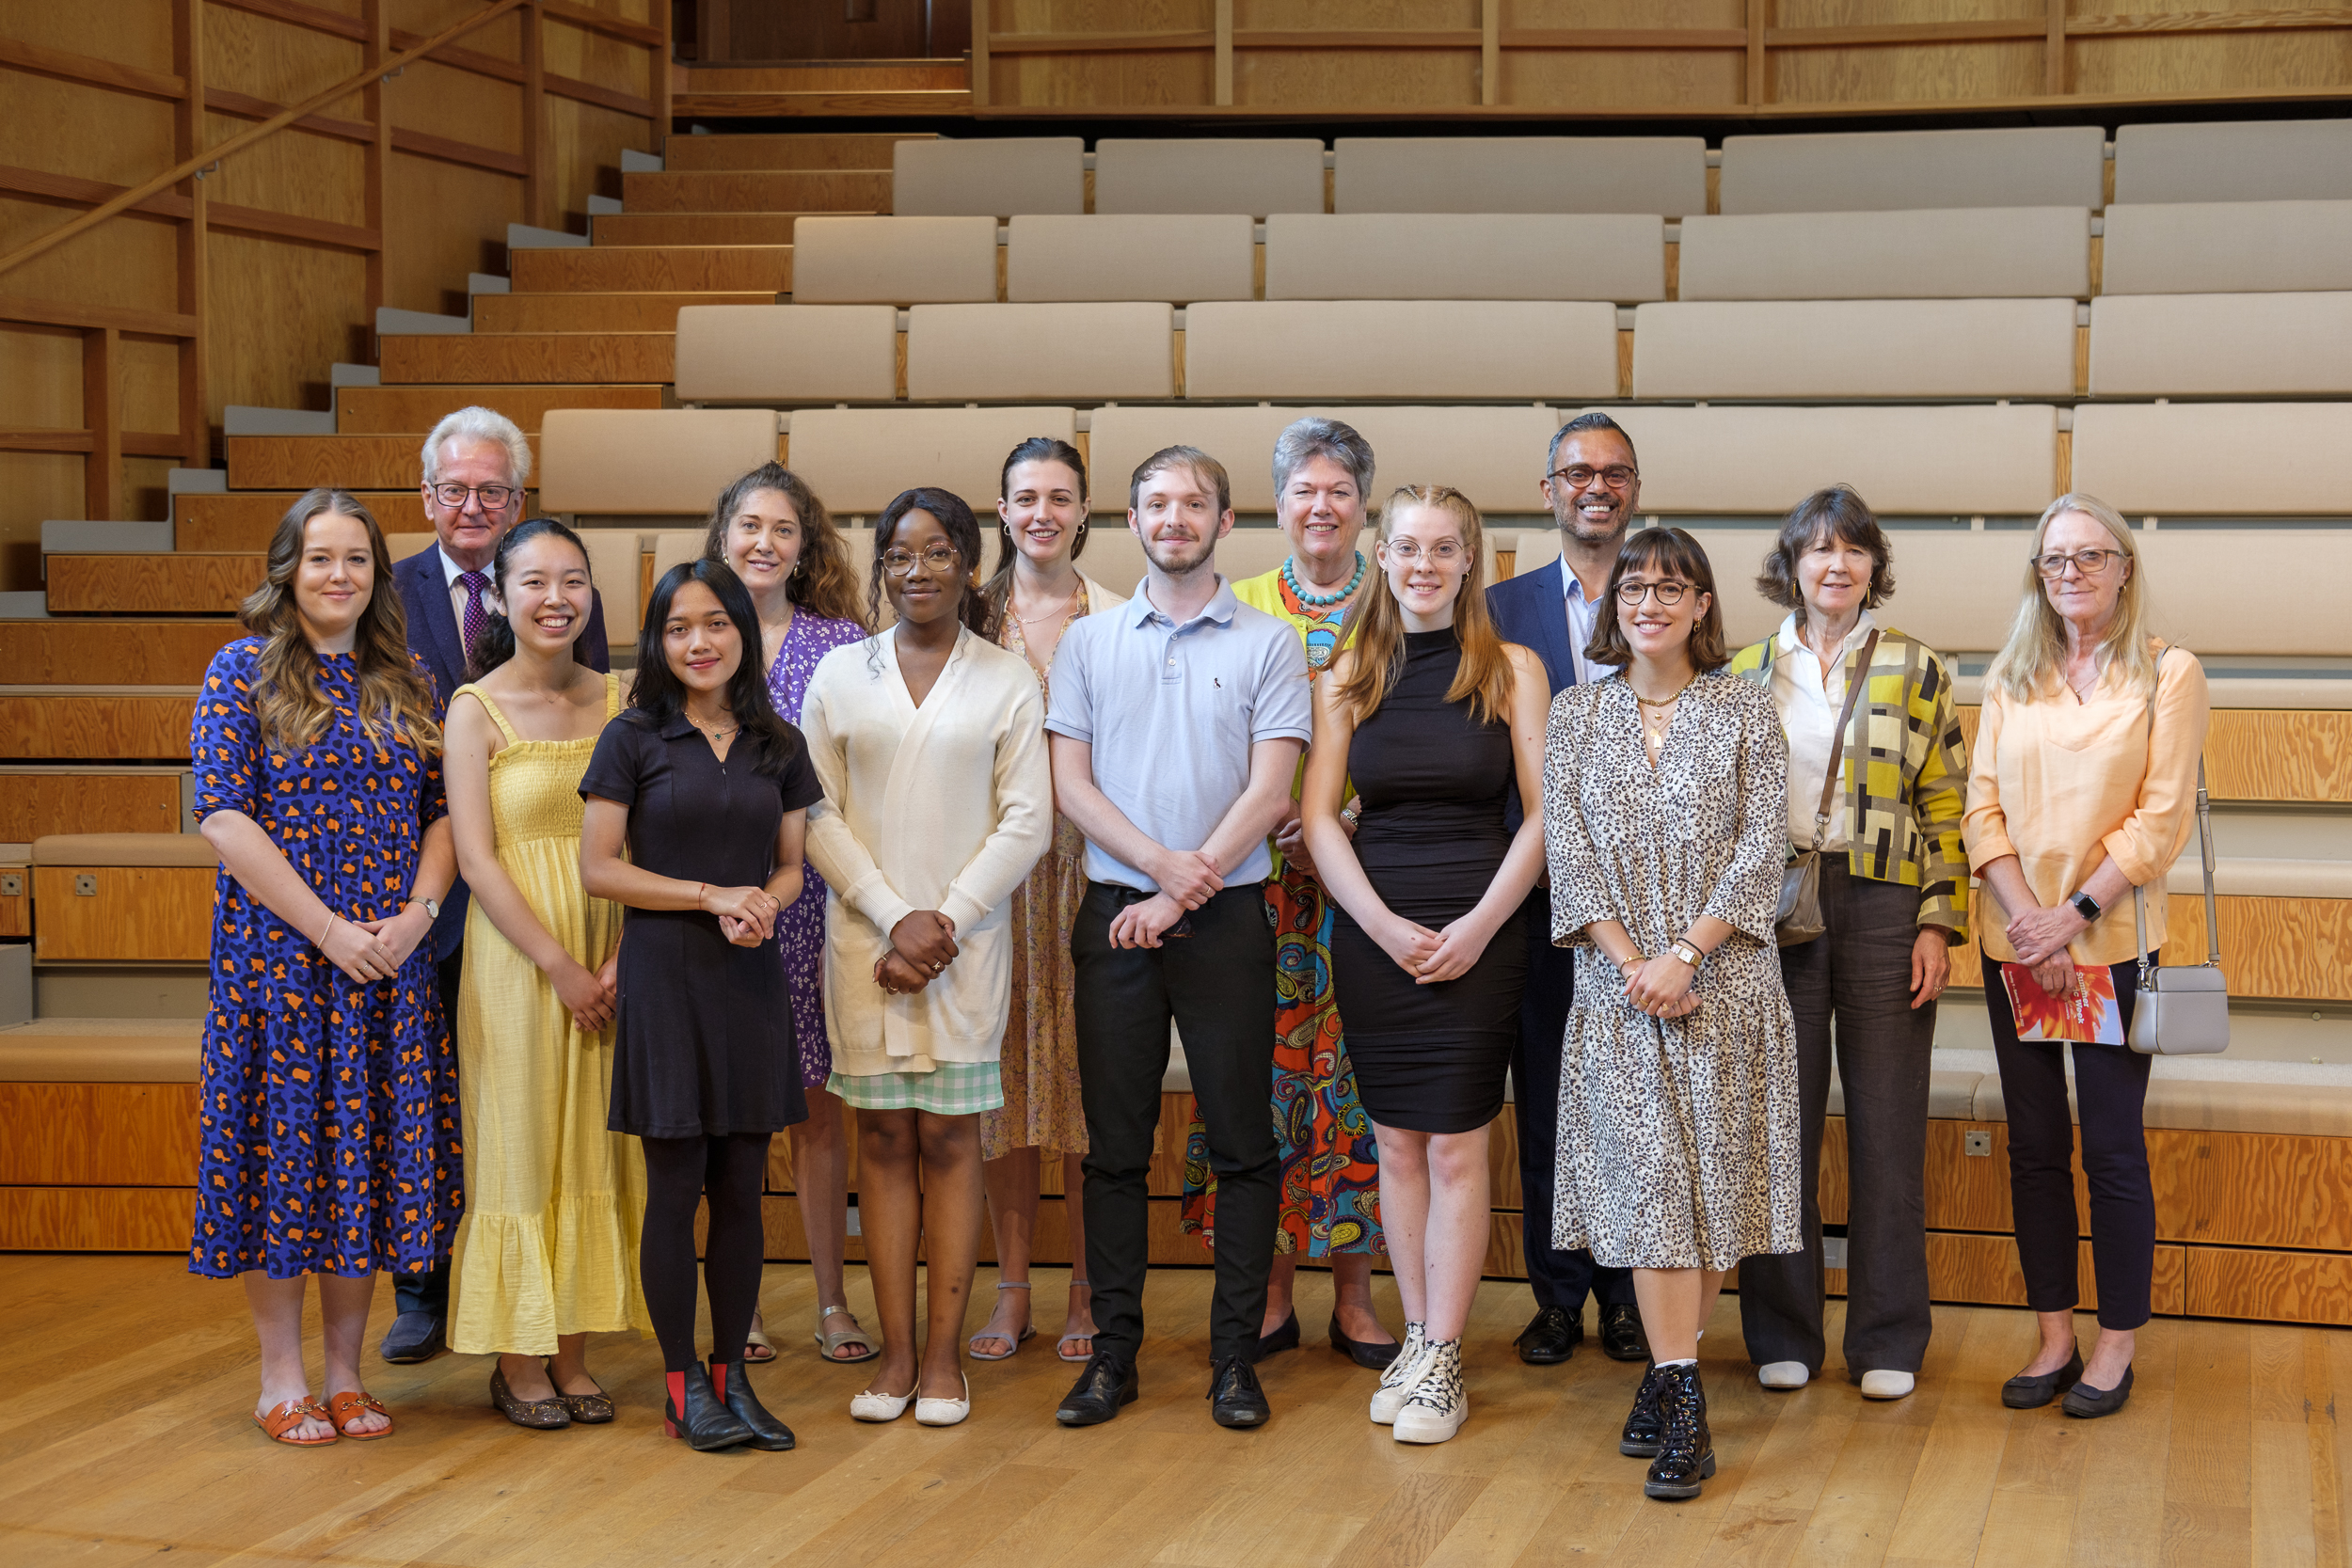 University Music Prizes recognise outstanding contributions to music-making